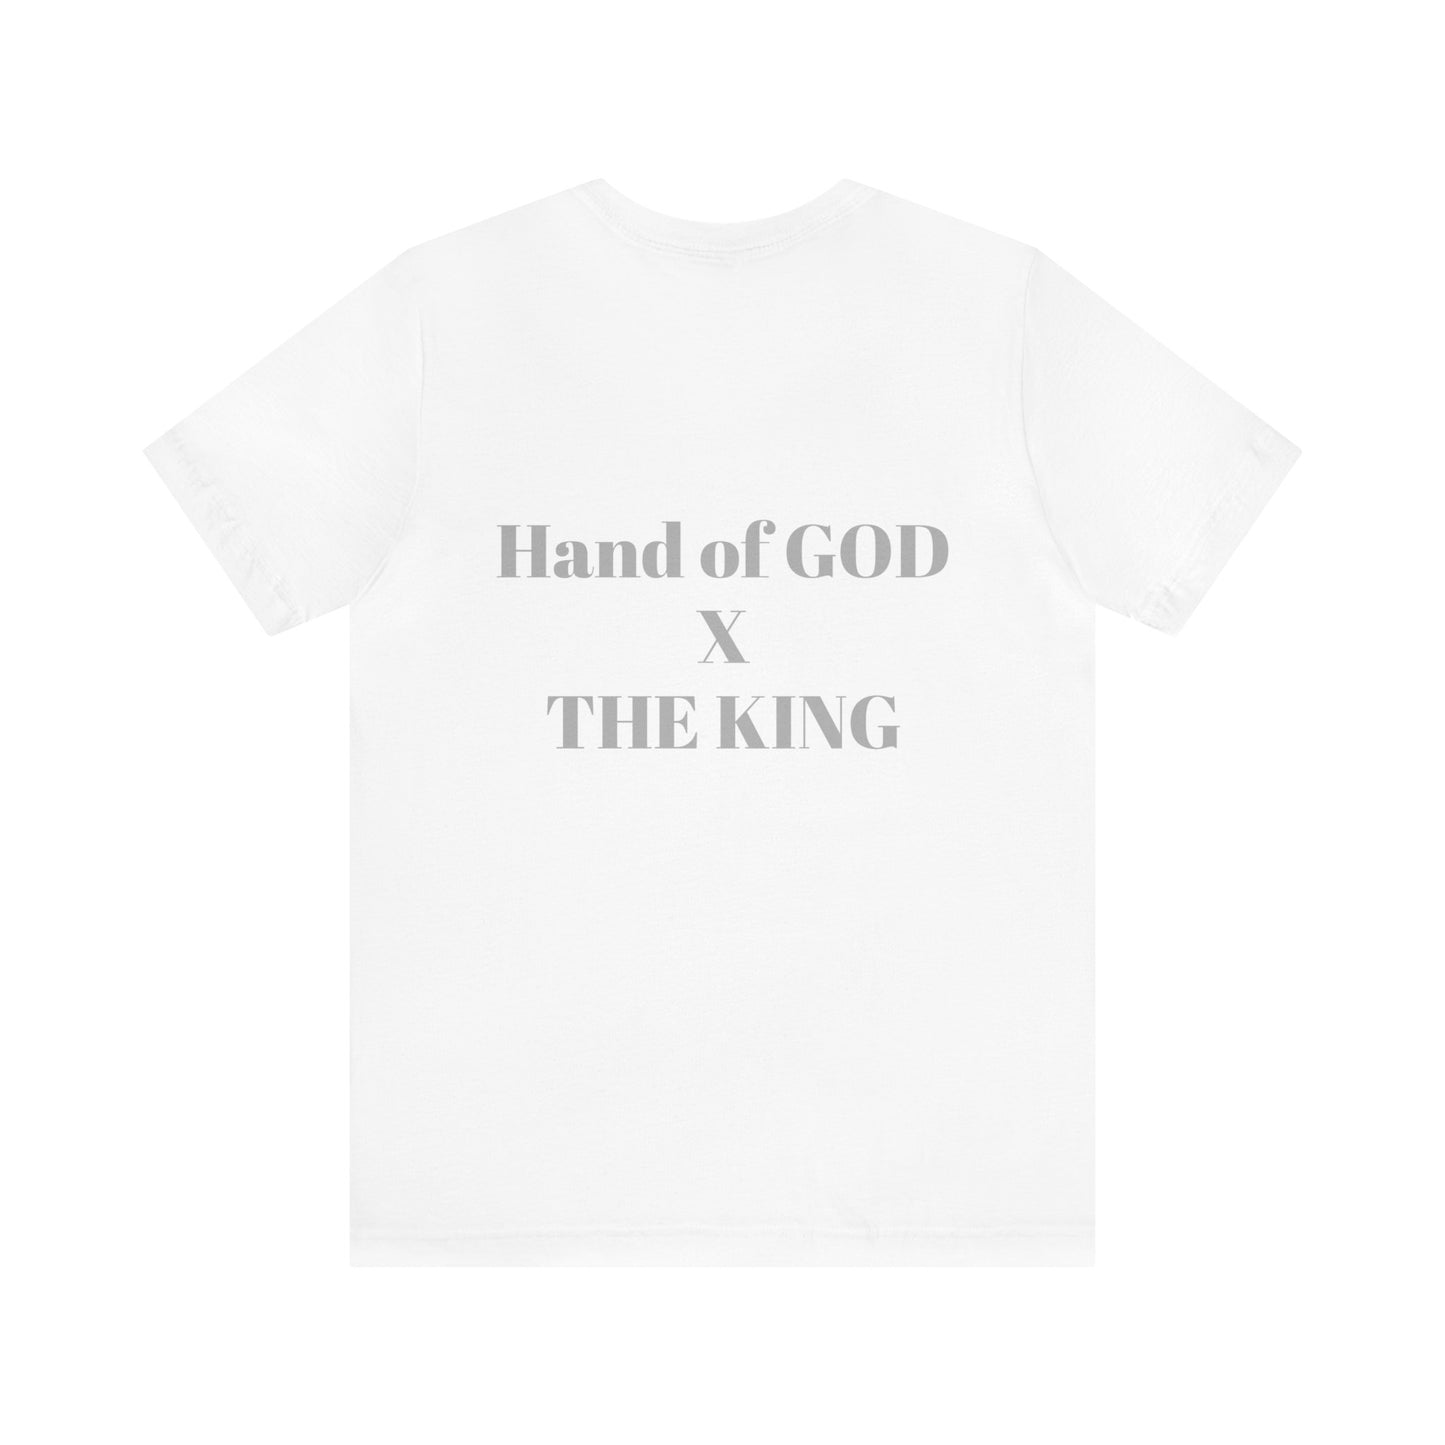 Hand of God X The King